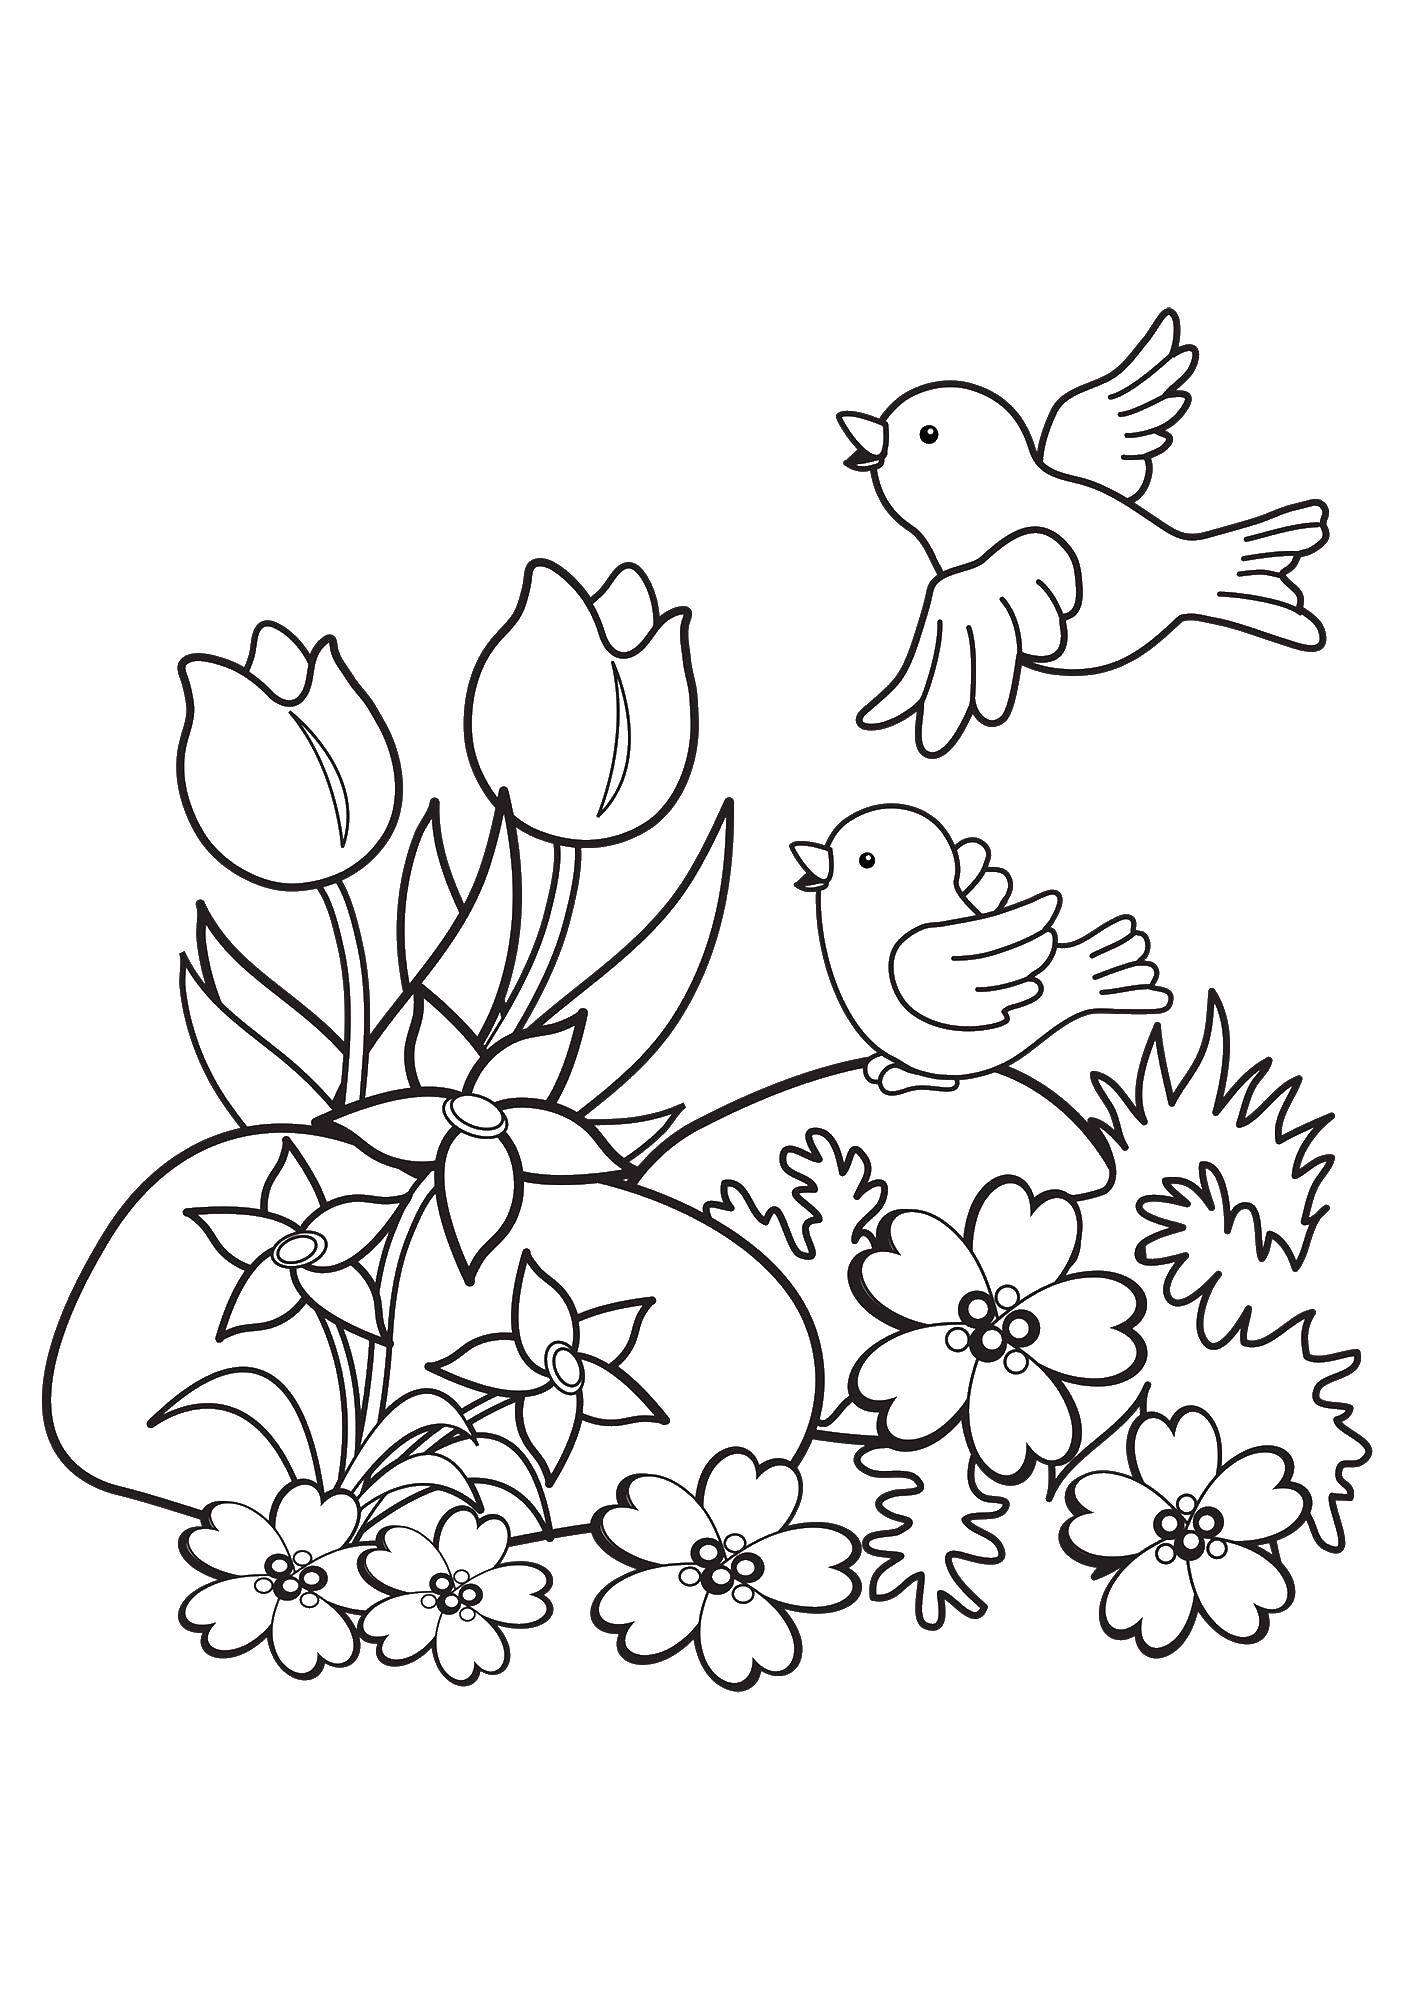 Coloring Birds in the meadow with flowers. Category Animals. Tags:  flowers, birds.